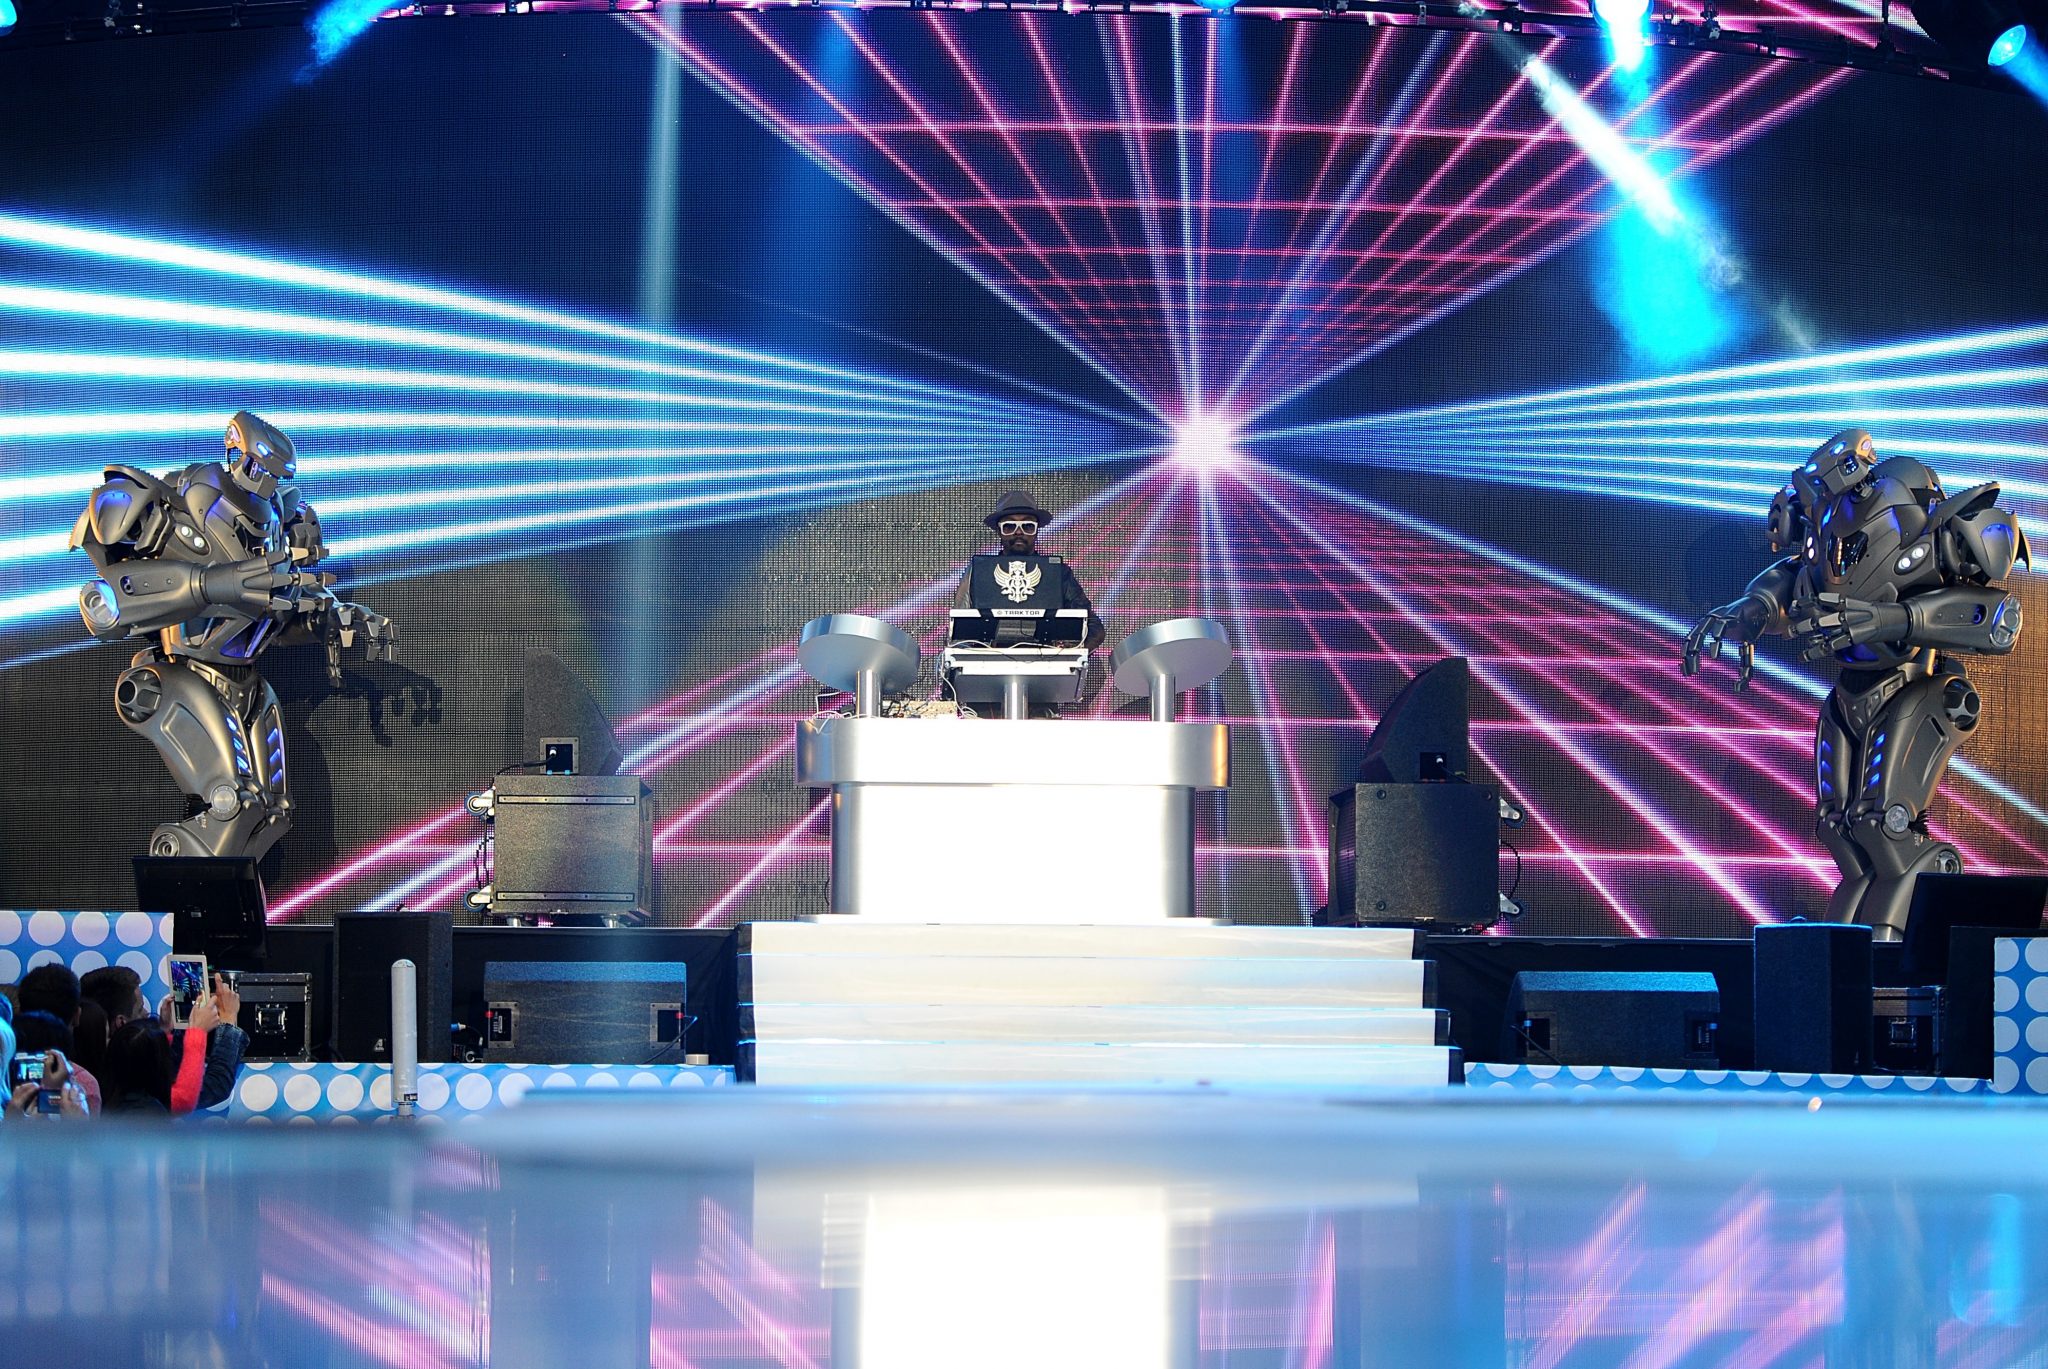 Titan the performs with Will.i.am during Capital FM's Summertime Ball at Wembley Stadium, London.